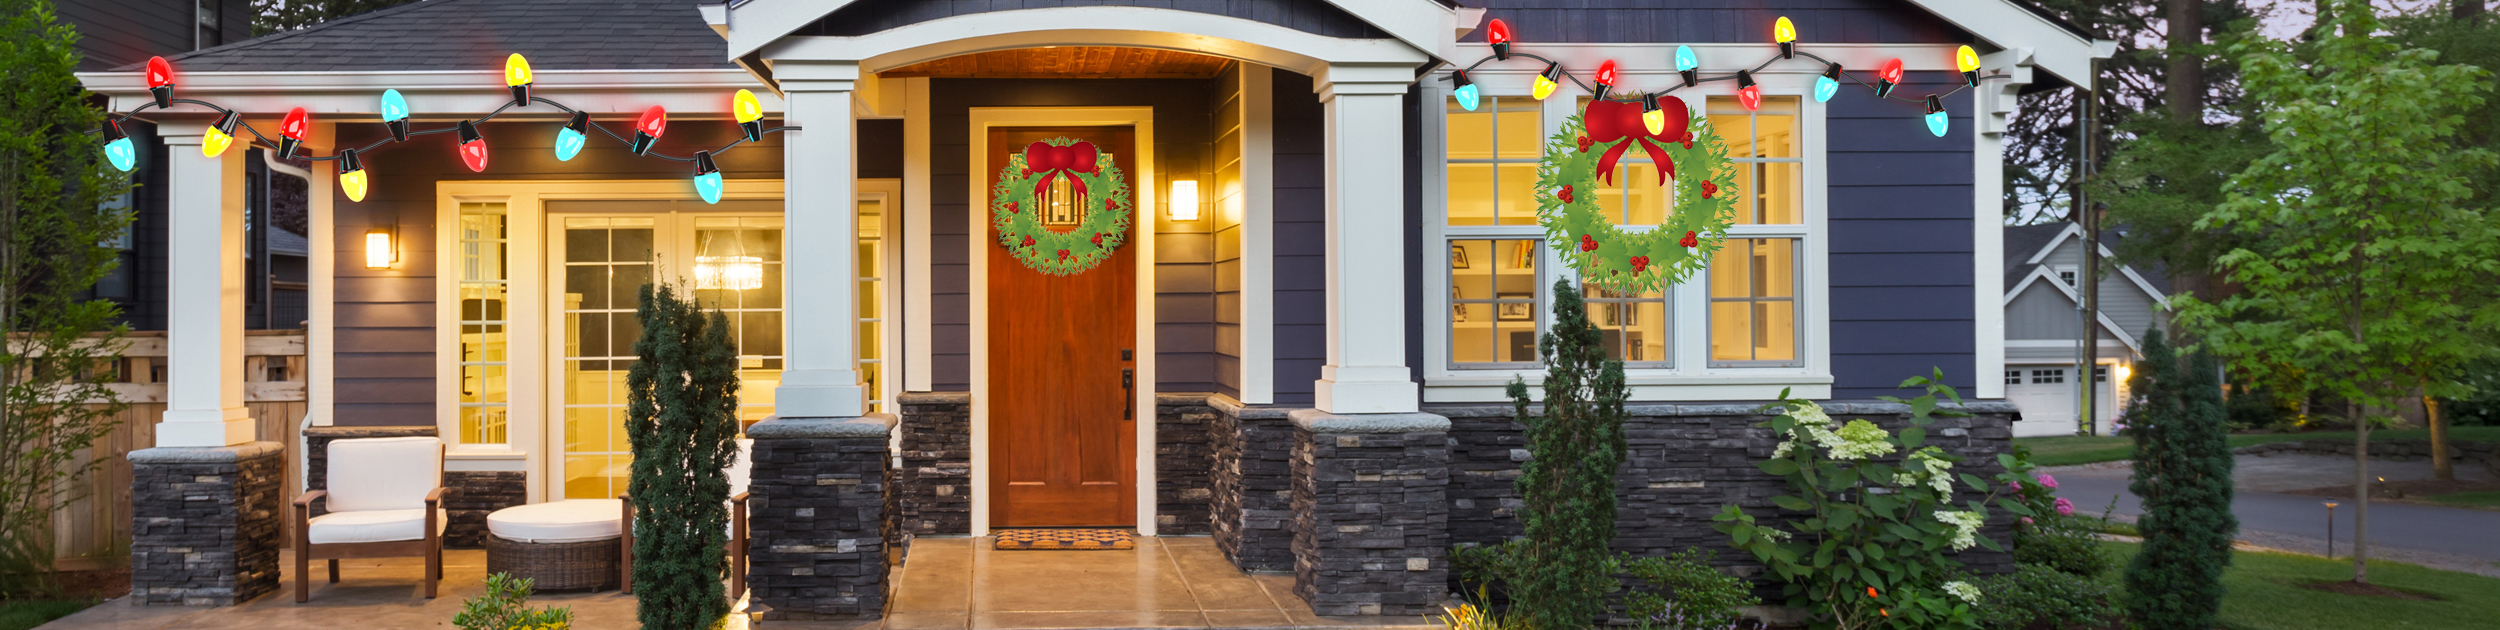 beautiful home with interior lights on and Christmas decorations outside